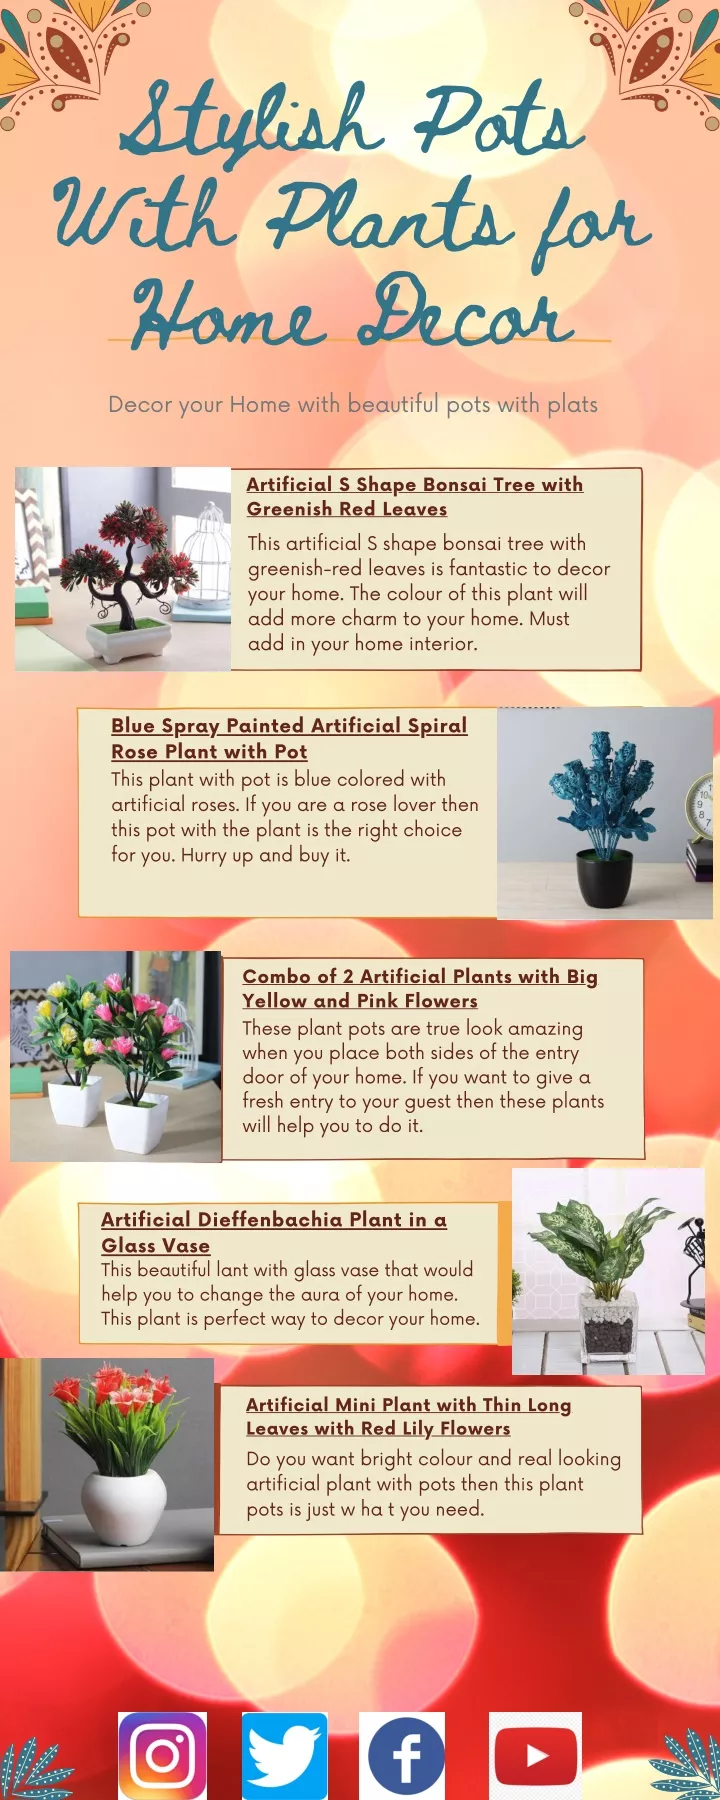 stylish pots with plants for home decor decor n.